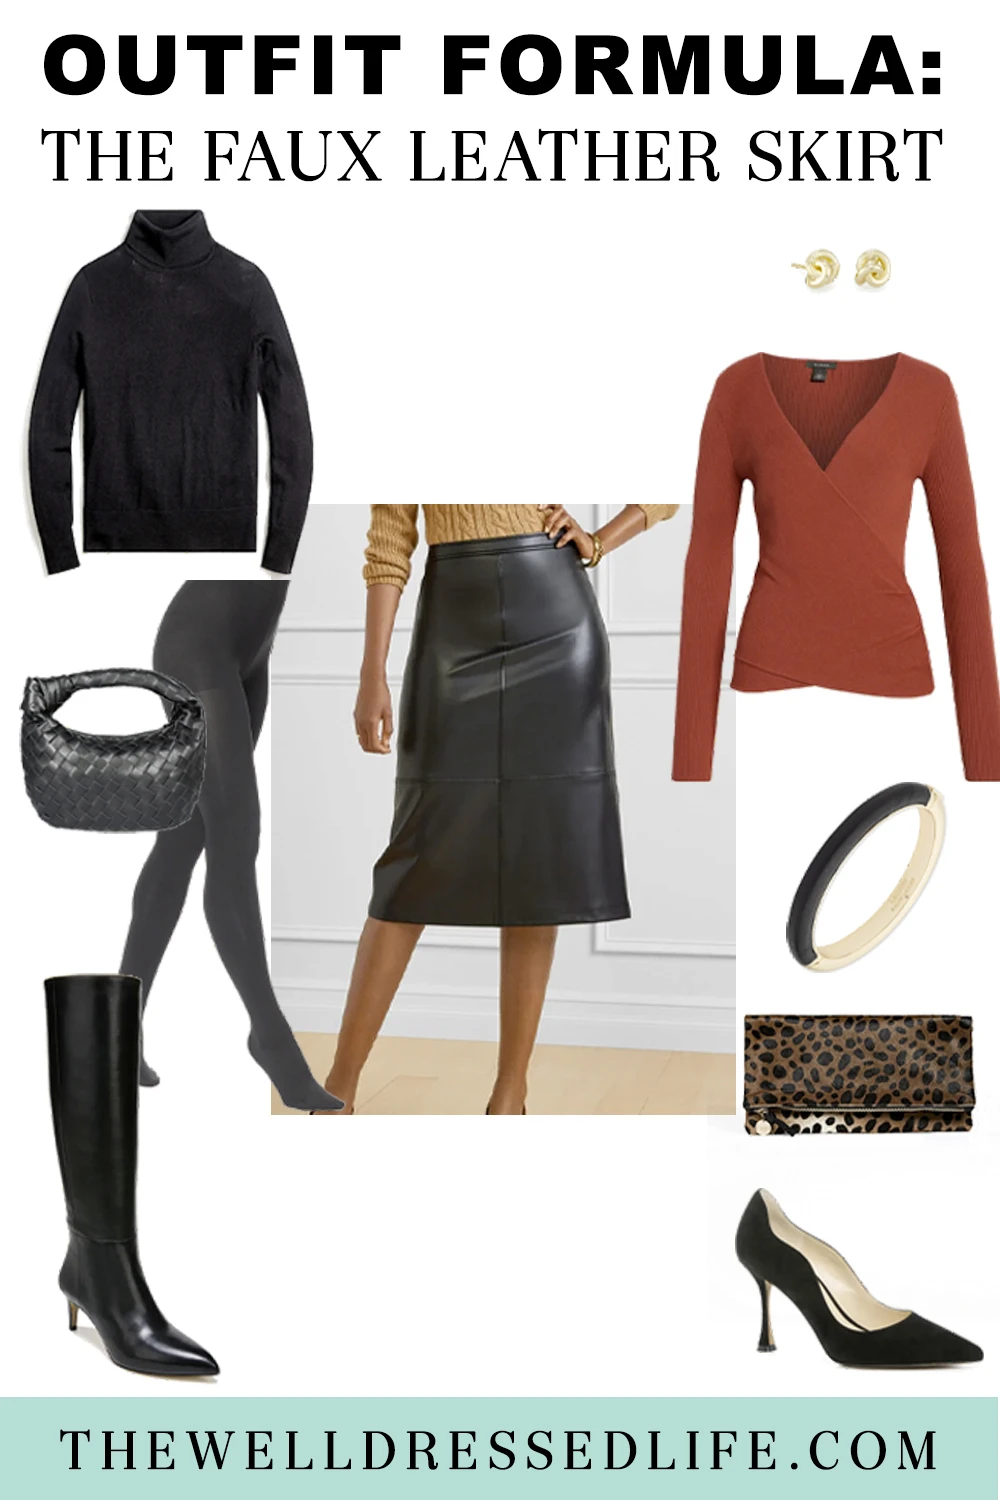 Outfit Formula: The Faux Leather Skirt